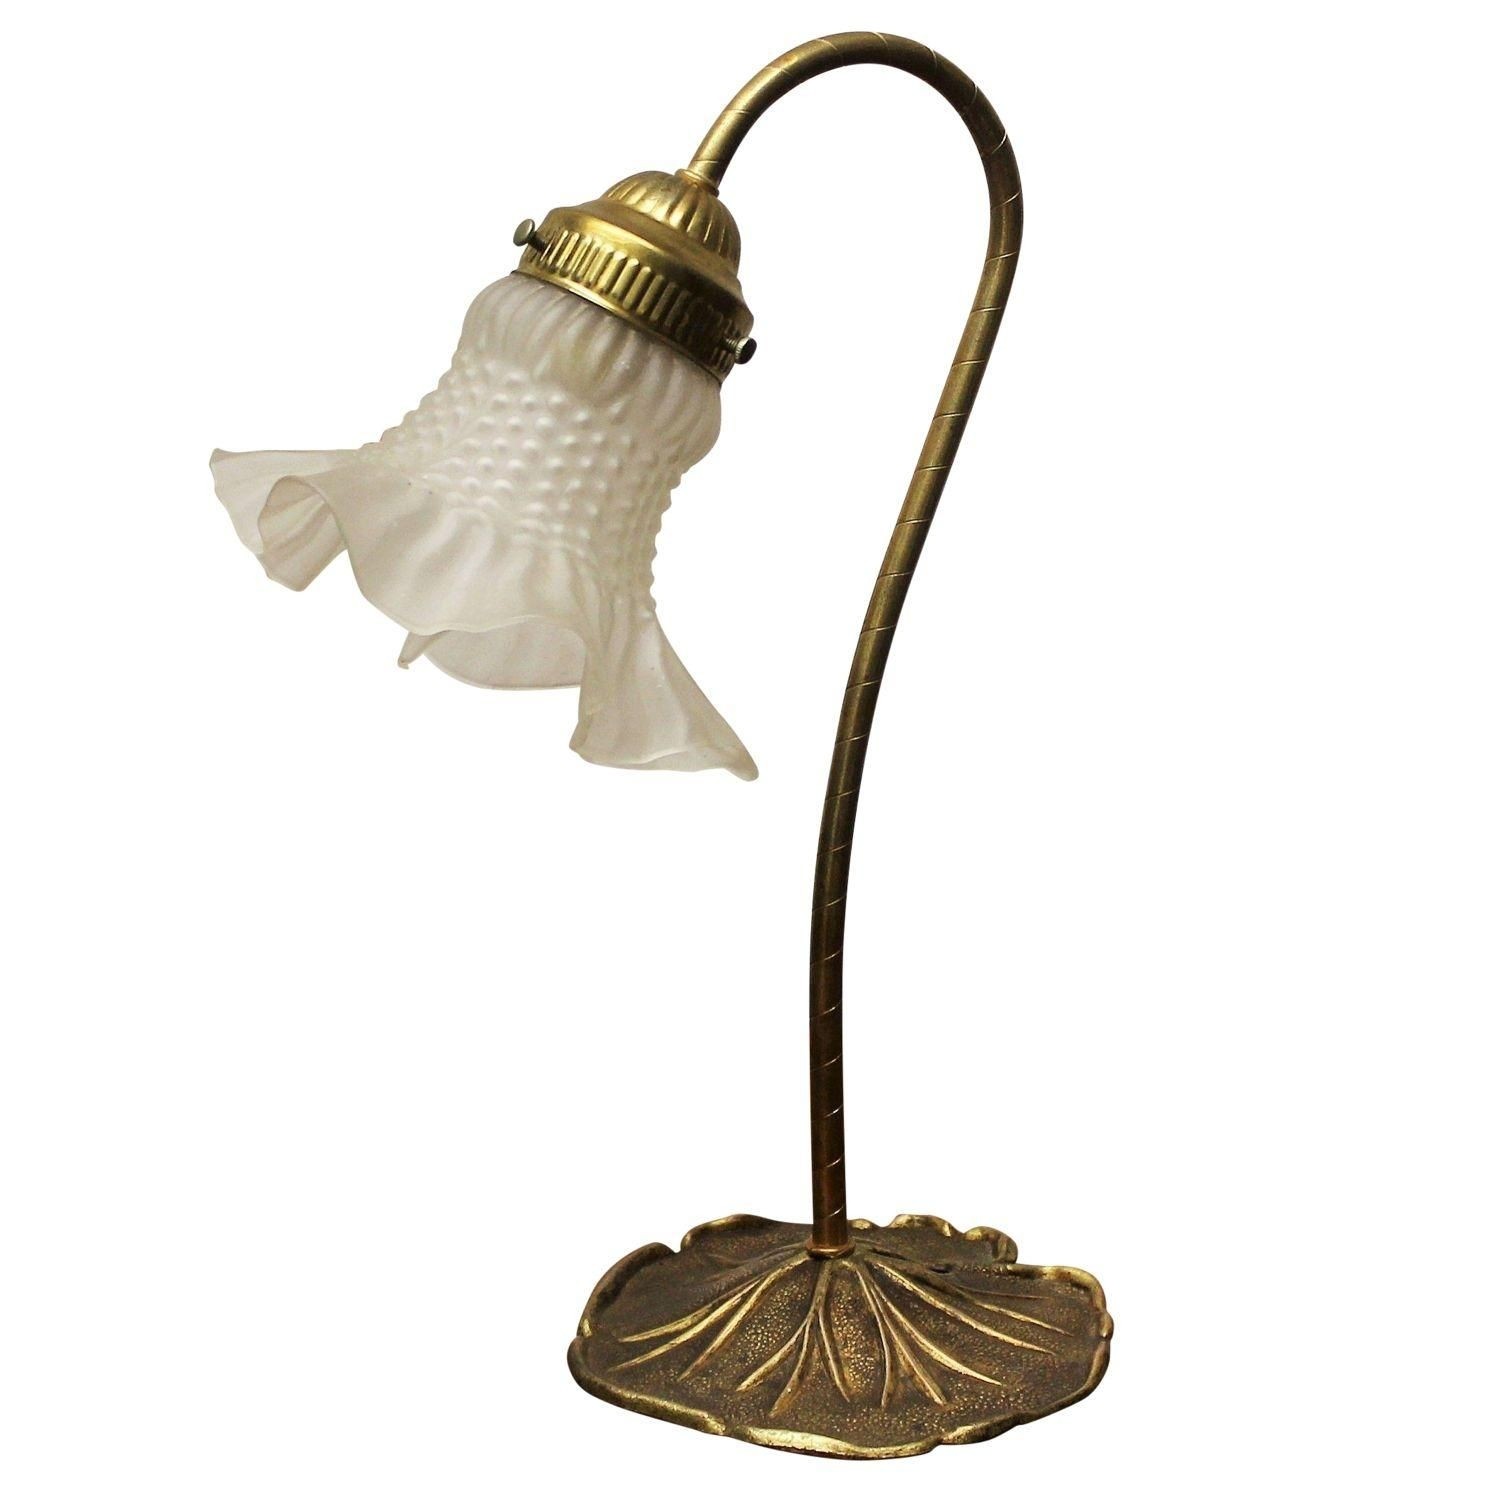 Art nouveau lily pad accent lamp on with